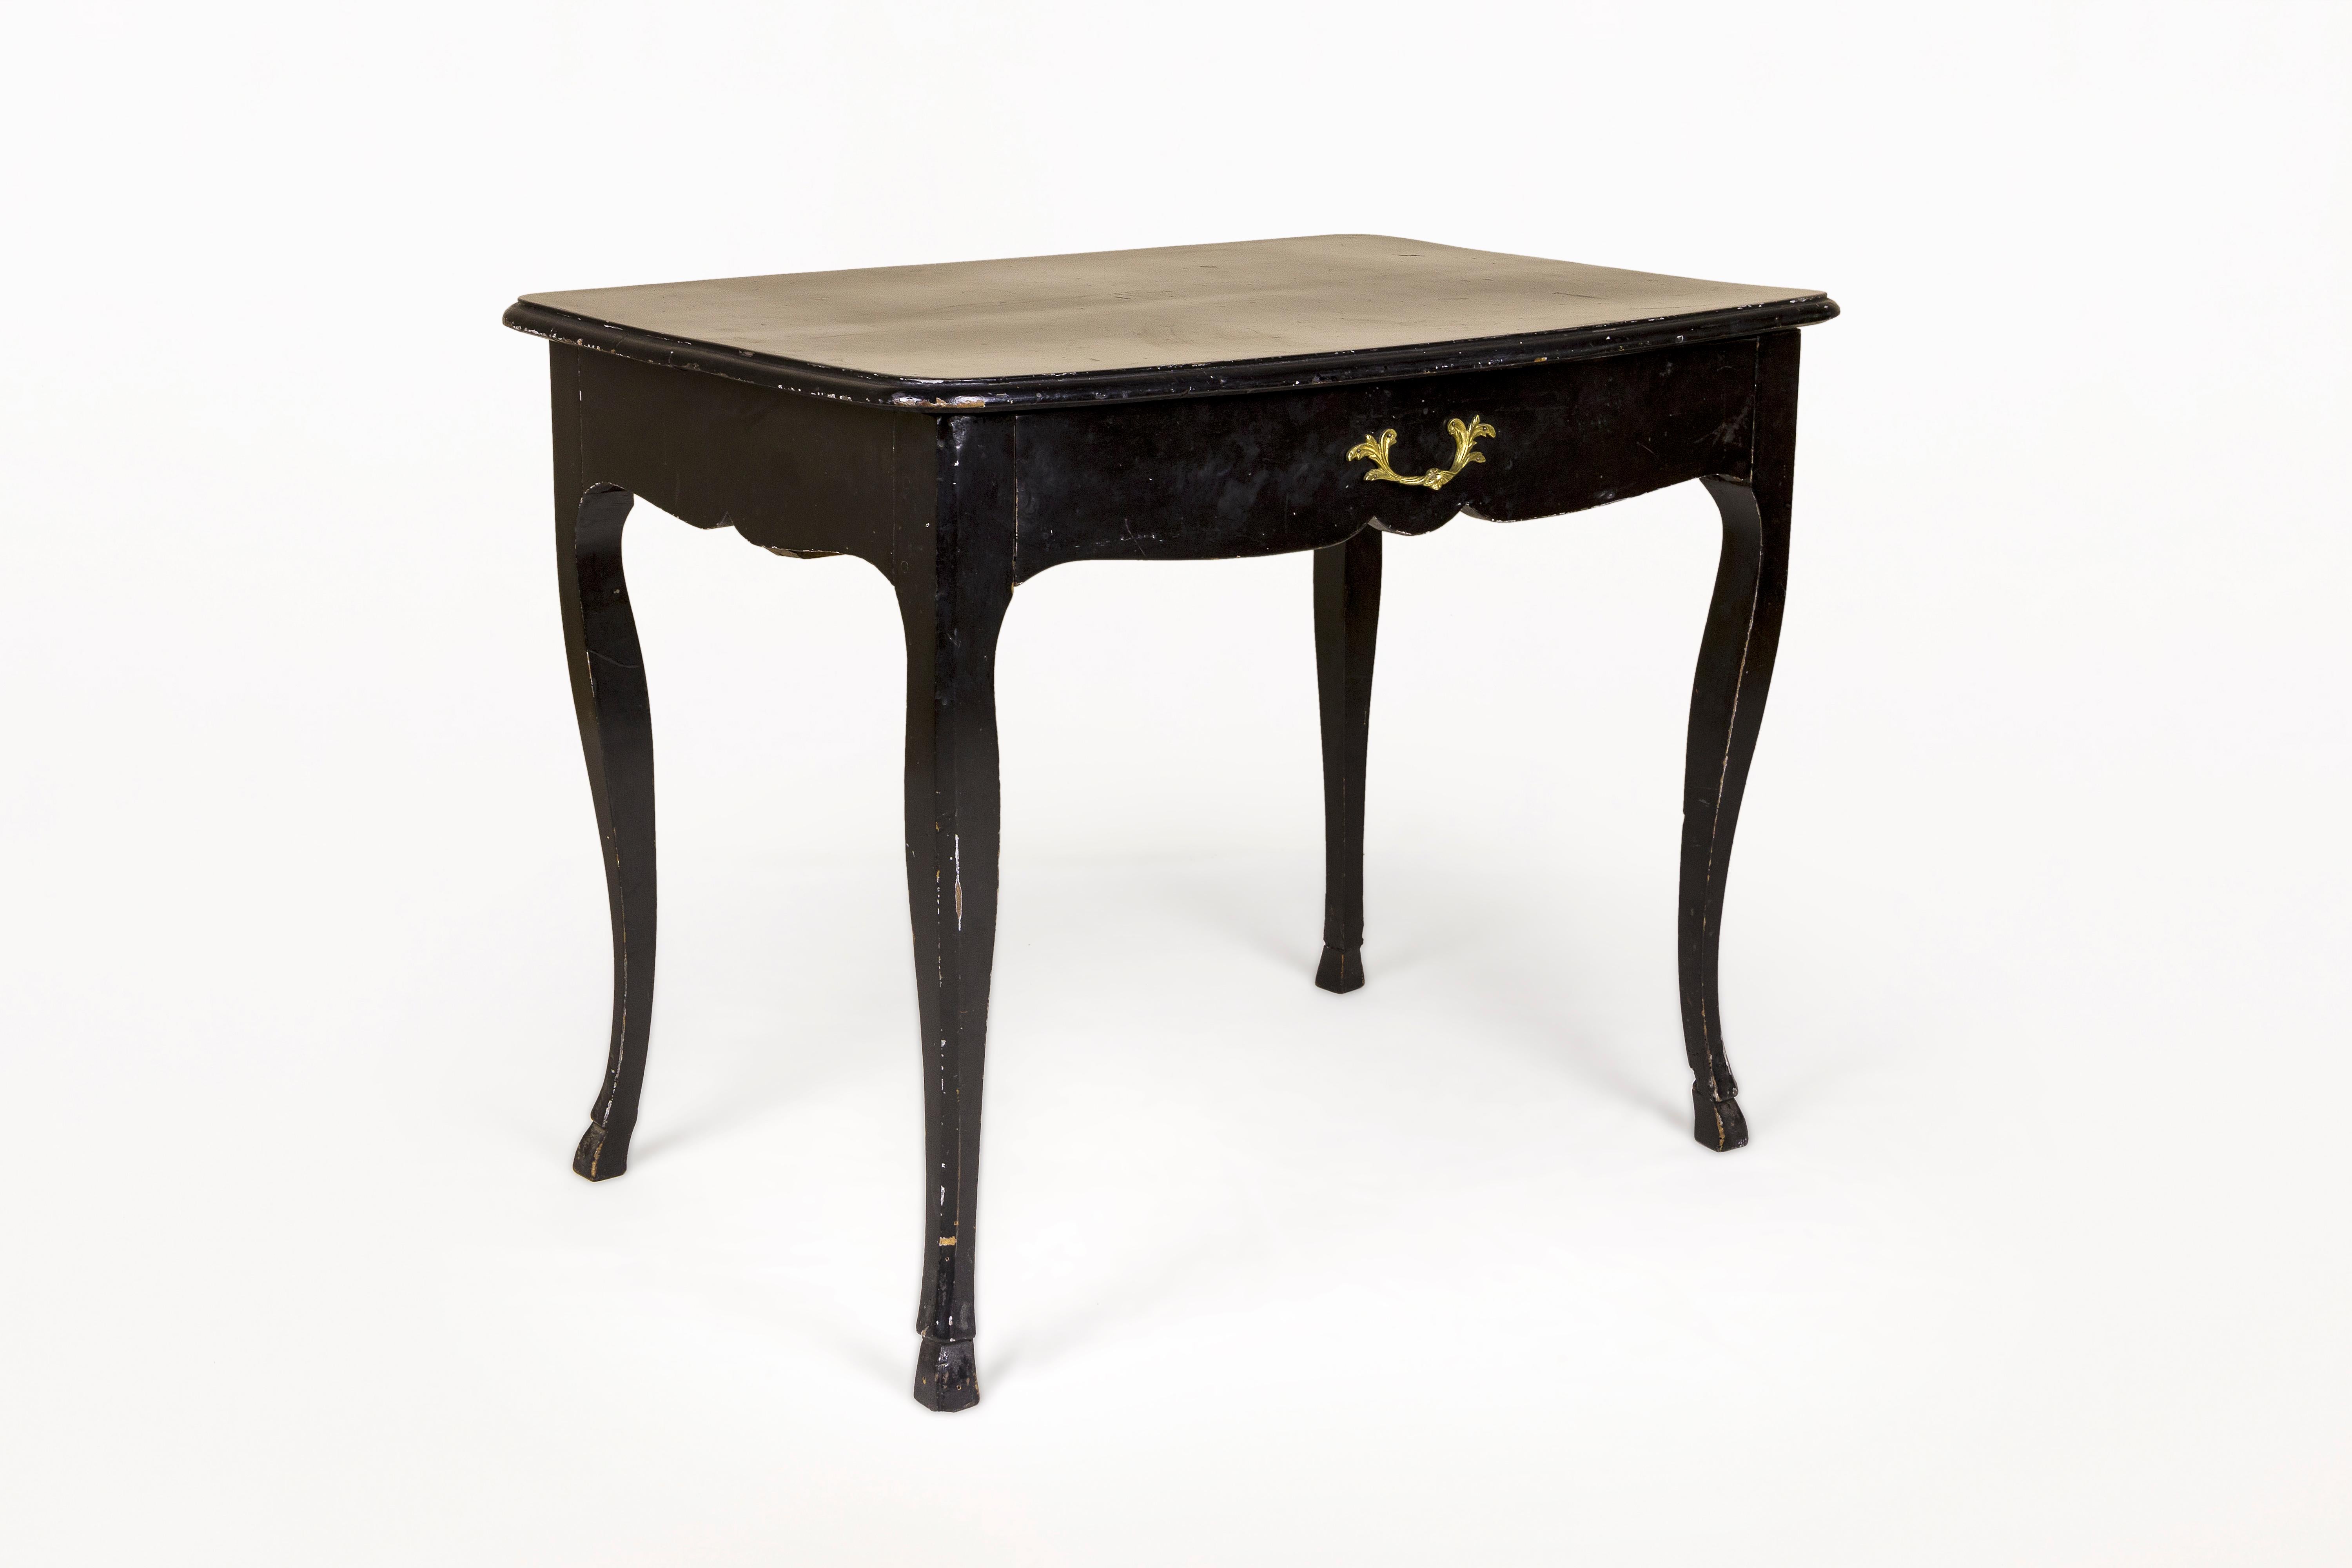 Console table, 
Made with cherry wood.
Lacquered in black.
Central drawer, with brass handle.
Carved hoof legs.
Very decorative.
XVIII Century, France
Good vintage condition.
Louis XV (in French, Louis Quinze) is an artistic style, mainly in